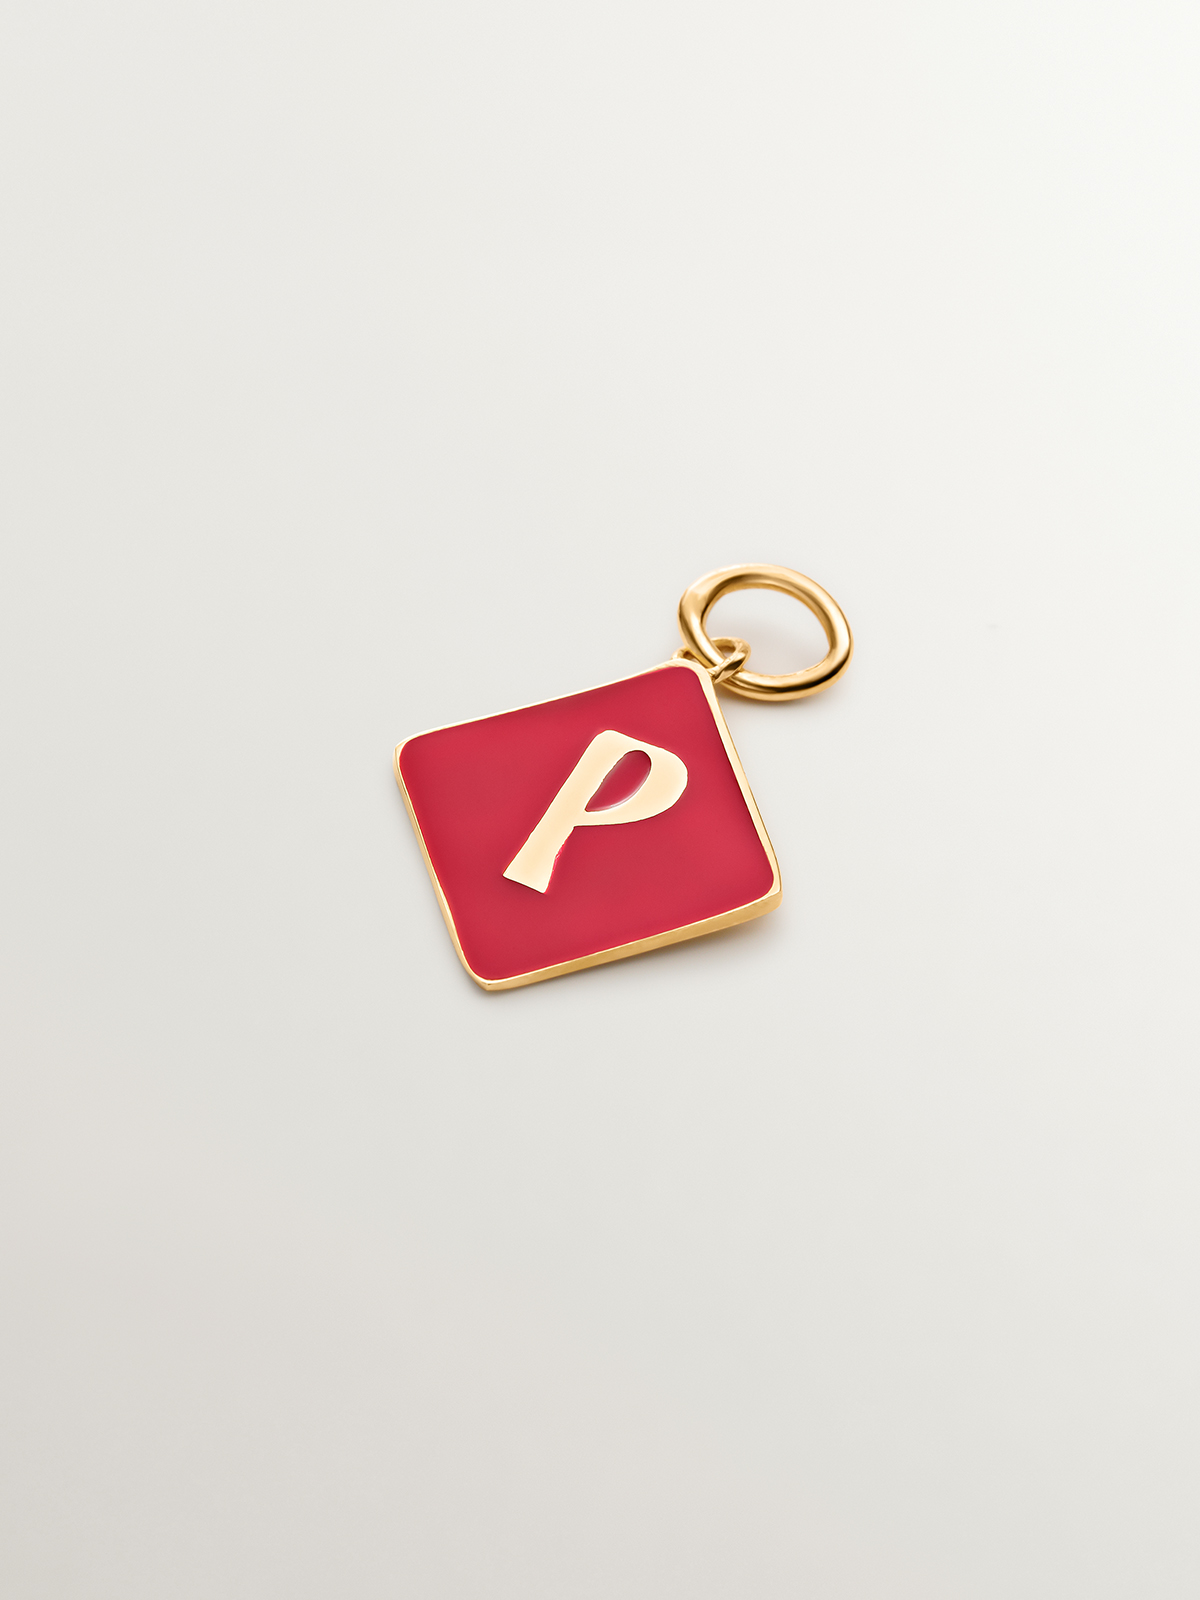 18K yellow gold plated 925 sterling silver charm with initial P and red enamel in diamond shape